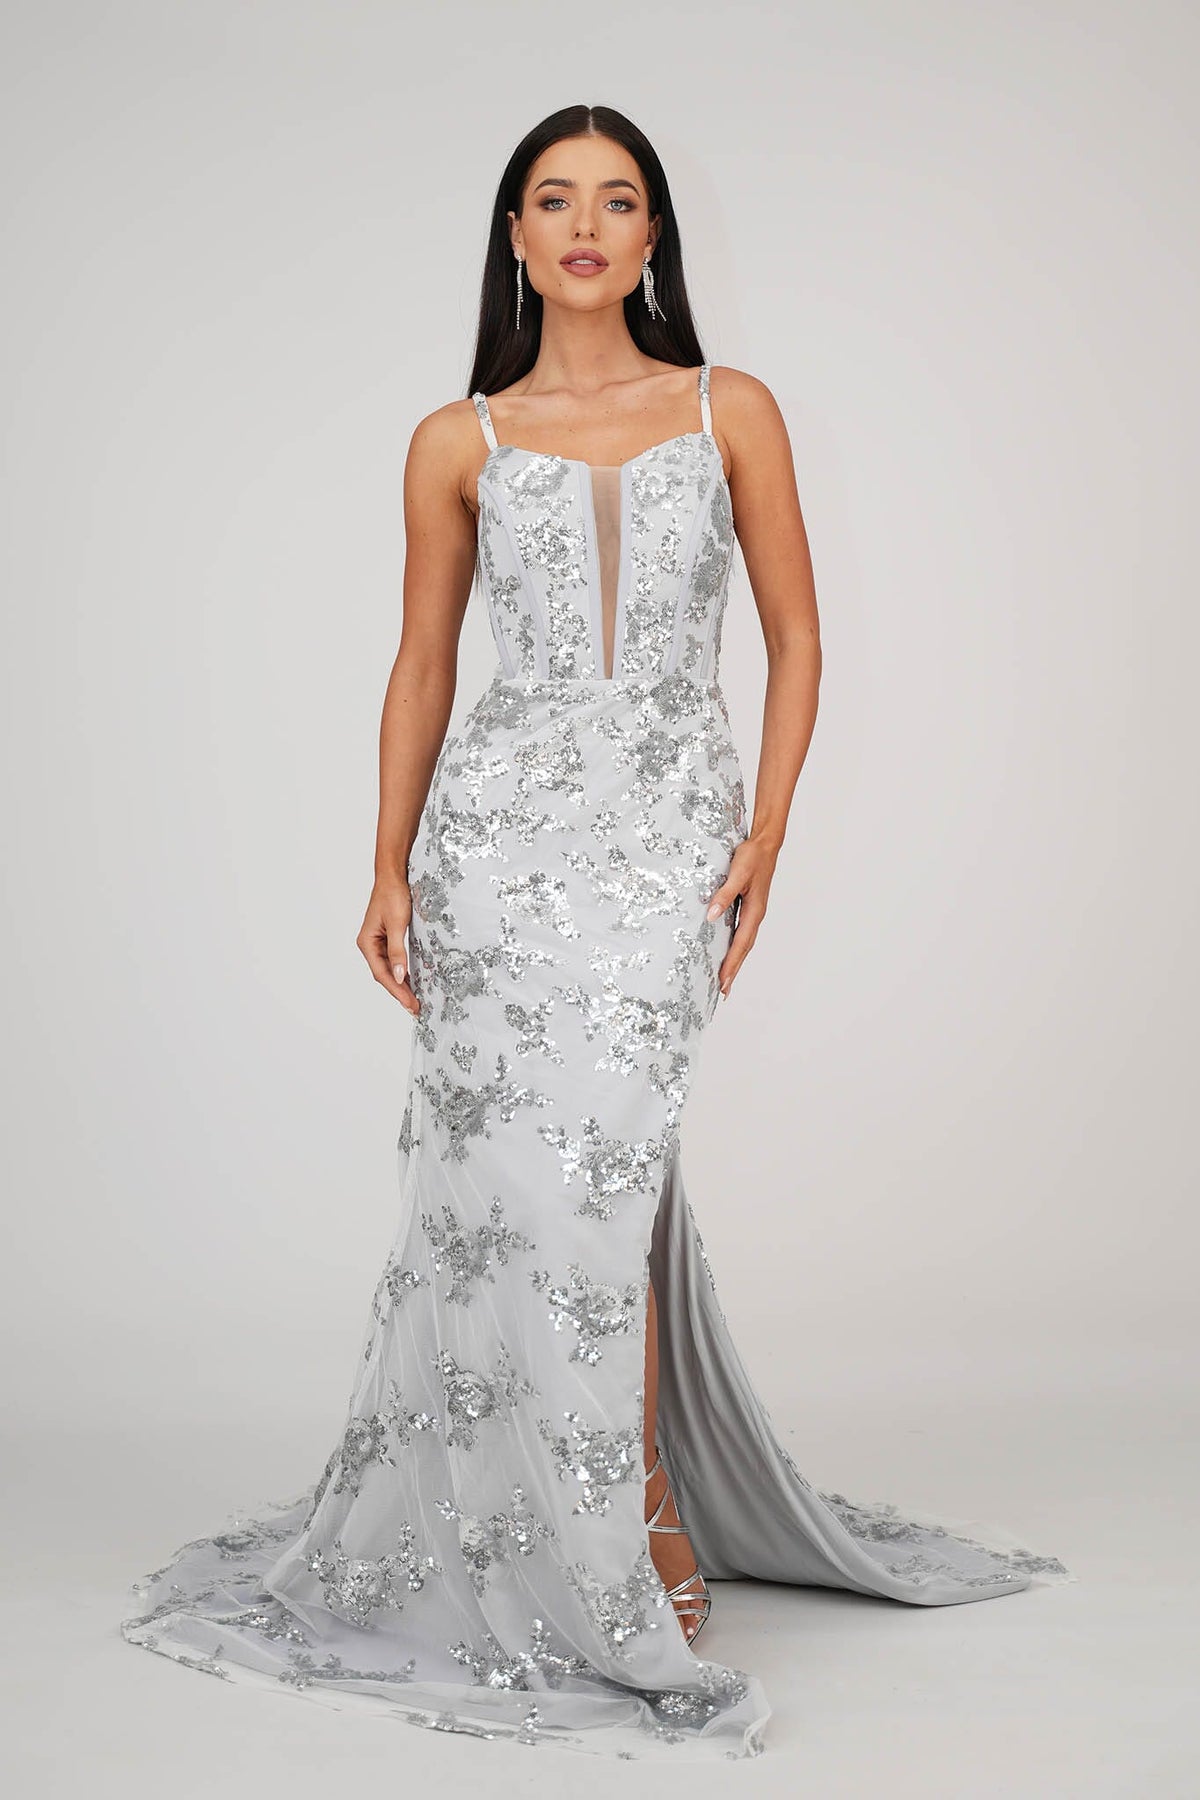 Silver Grey Floral Embellished Sequins Floor Length Evening Gown with Corset Bodice, Mesh Insert, Side Slit and Lace Up Open Back